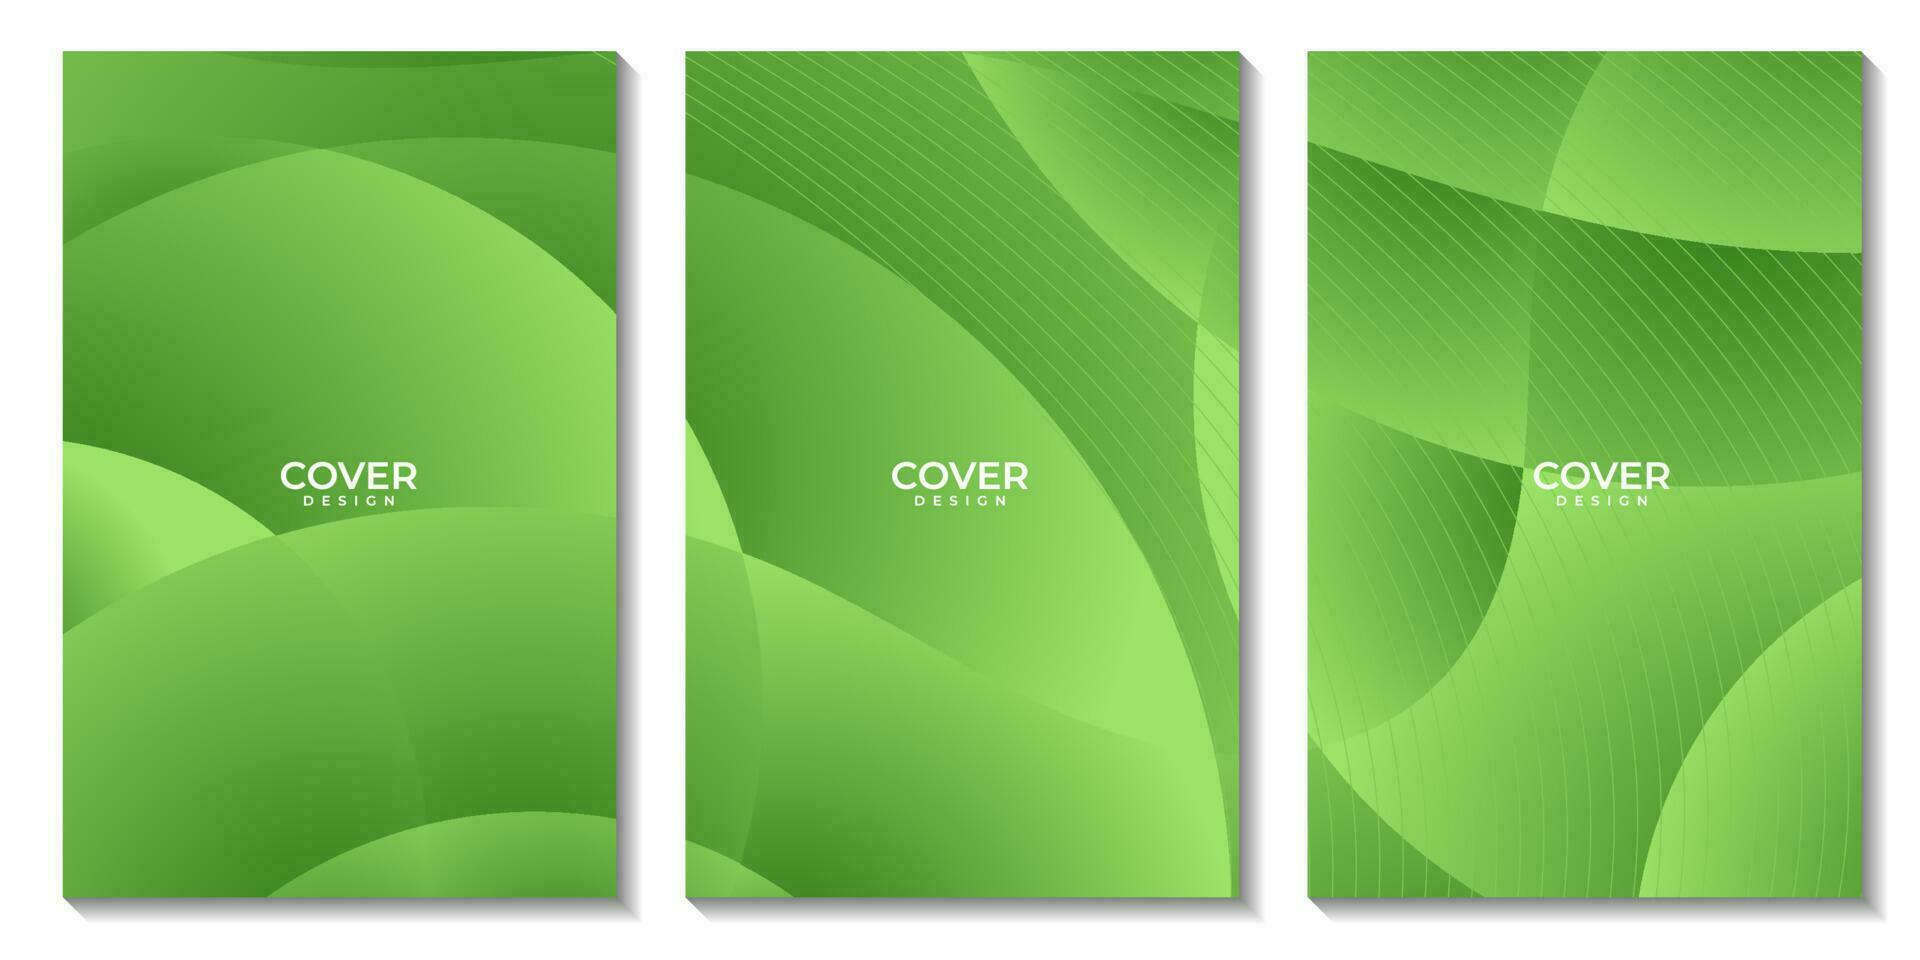 abstract vector green organic covers background for business